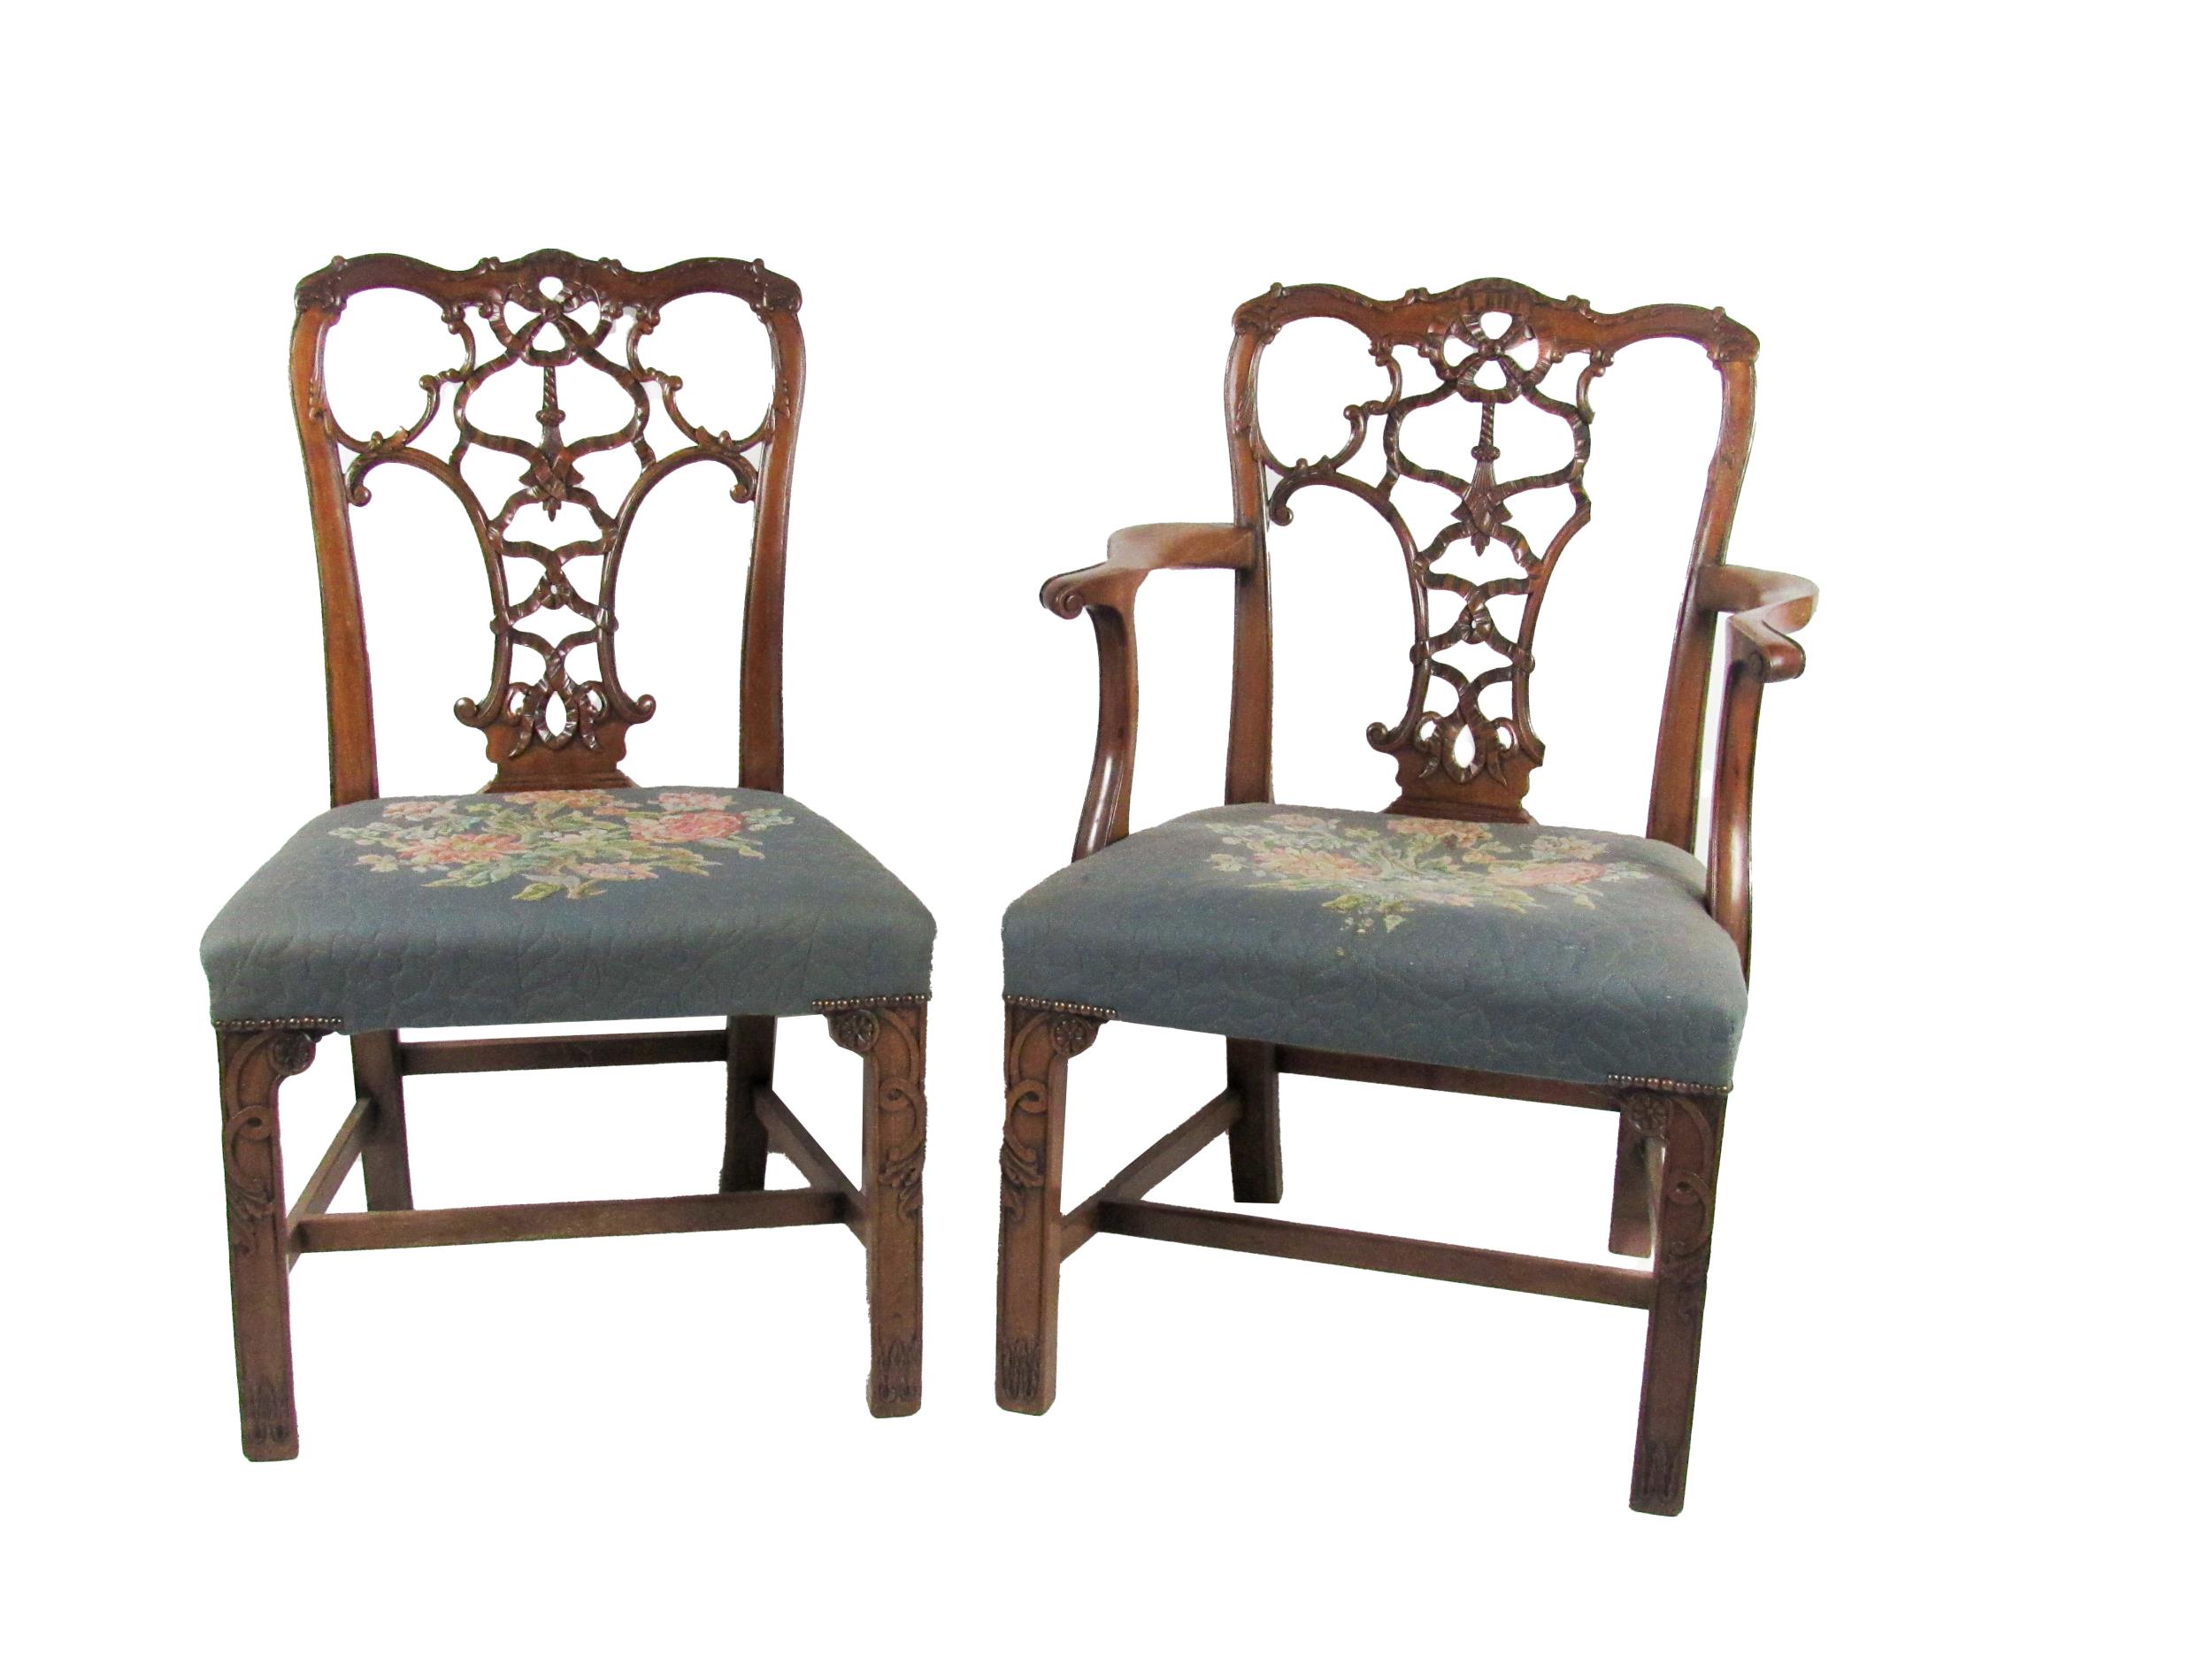 A set of 6 (4 + 2) mahogany Dining Chairs, decorated in the Chippendale style, with ornate carved